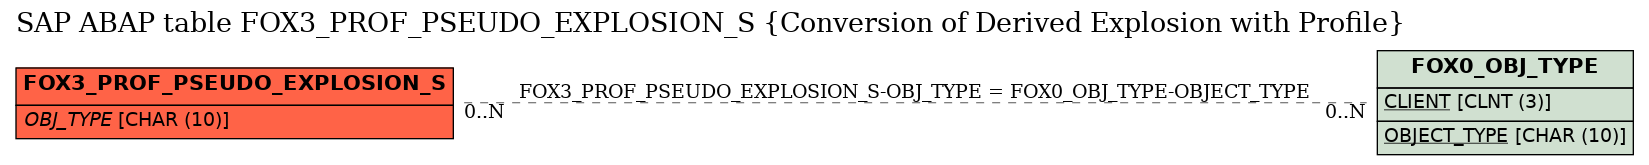 E-R Diagram for table FOX3_PROF_PSEUDO_EXPLOSION_S (Conversion of Derived Explosion with Profile)